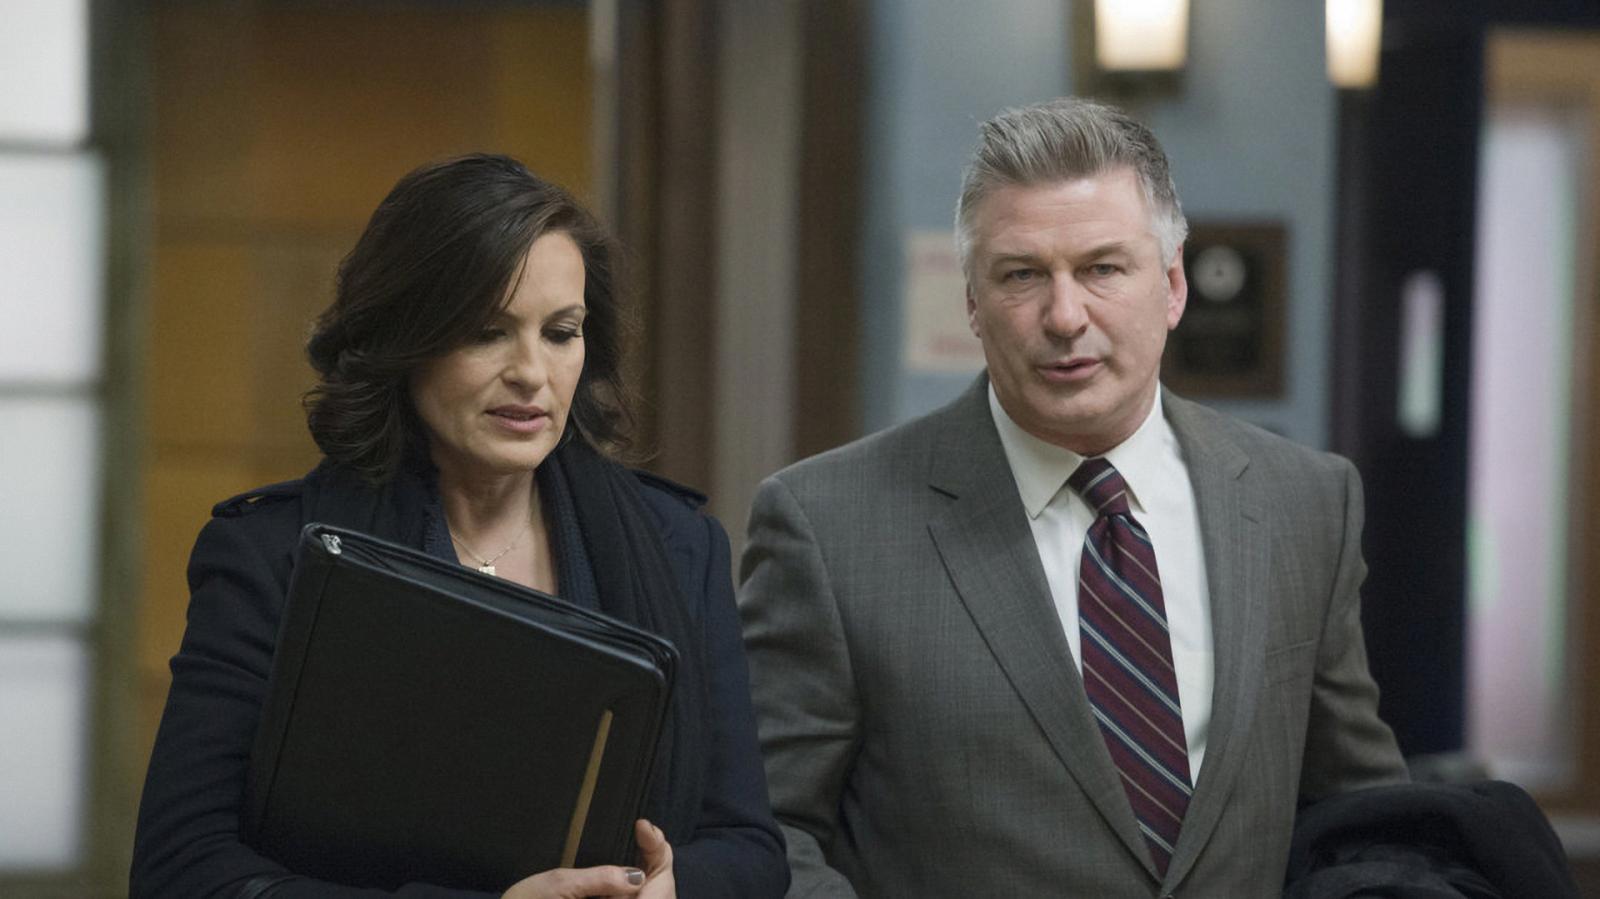 7 Big-Name Celebs You Totally Forgot Guest-Starred in SVU - image 3